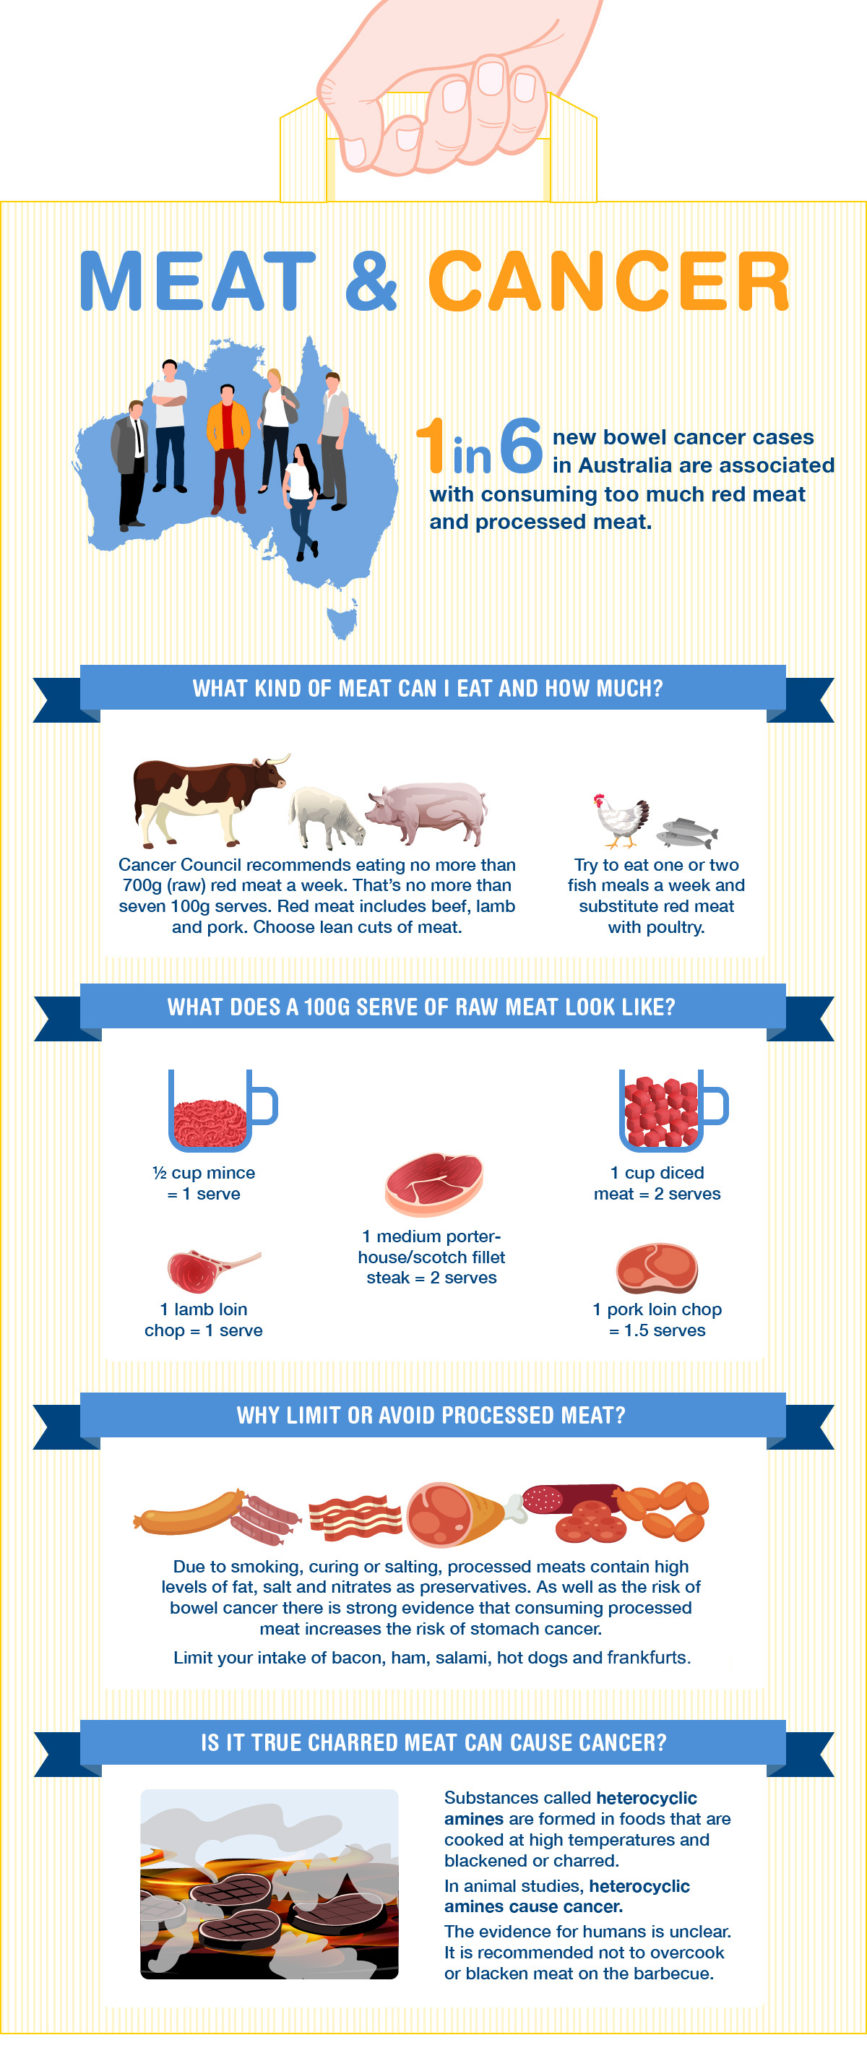 https://www.cancercouncil.com.au/wp-content/uploads/2023/08/Meat-Cancer-infographic_final-scaled-1.jpg